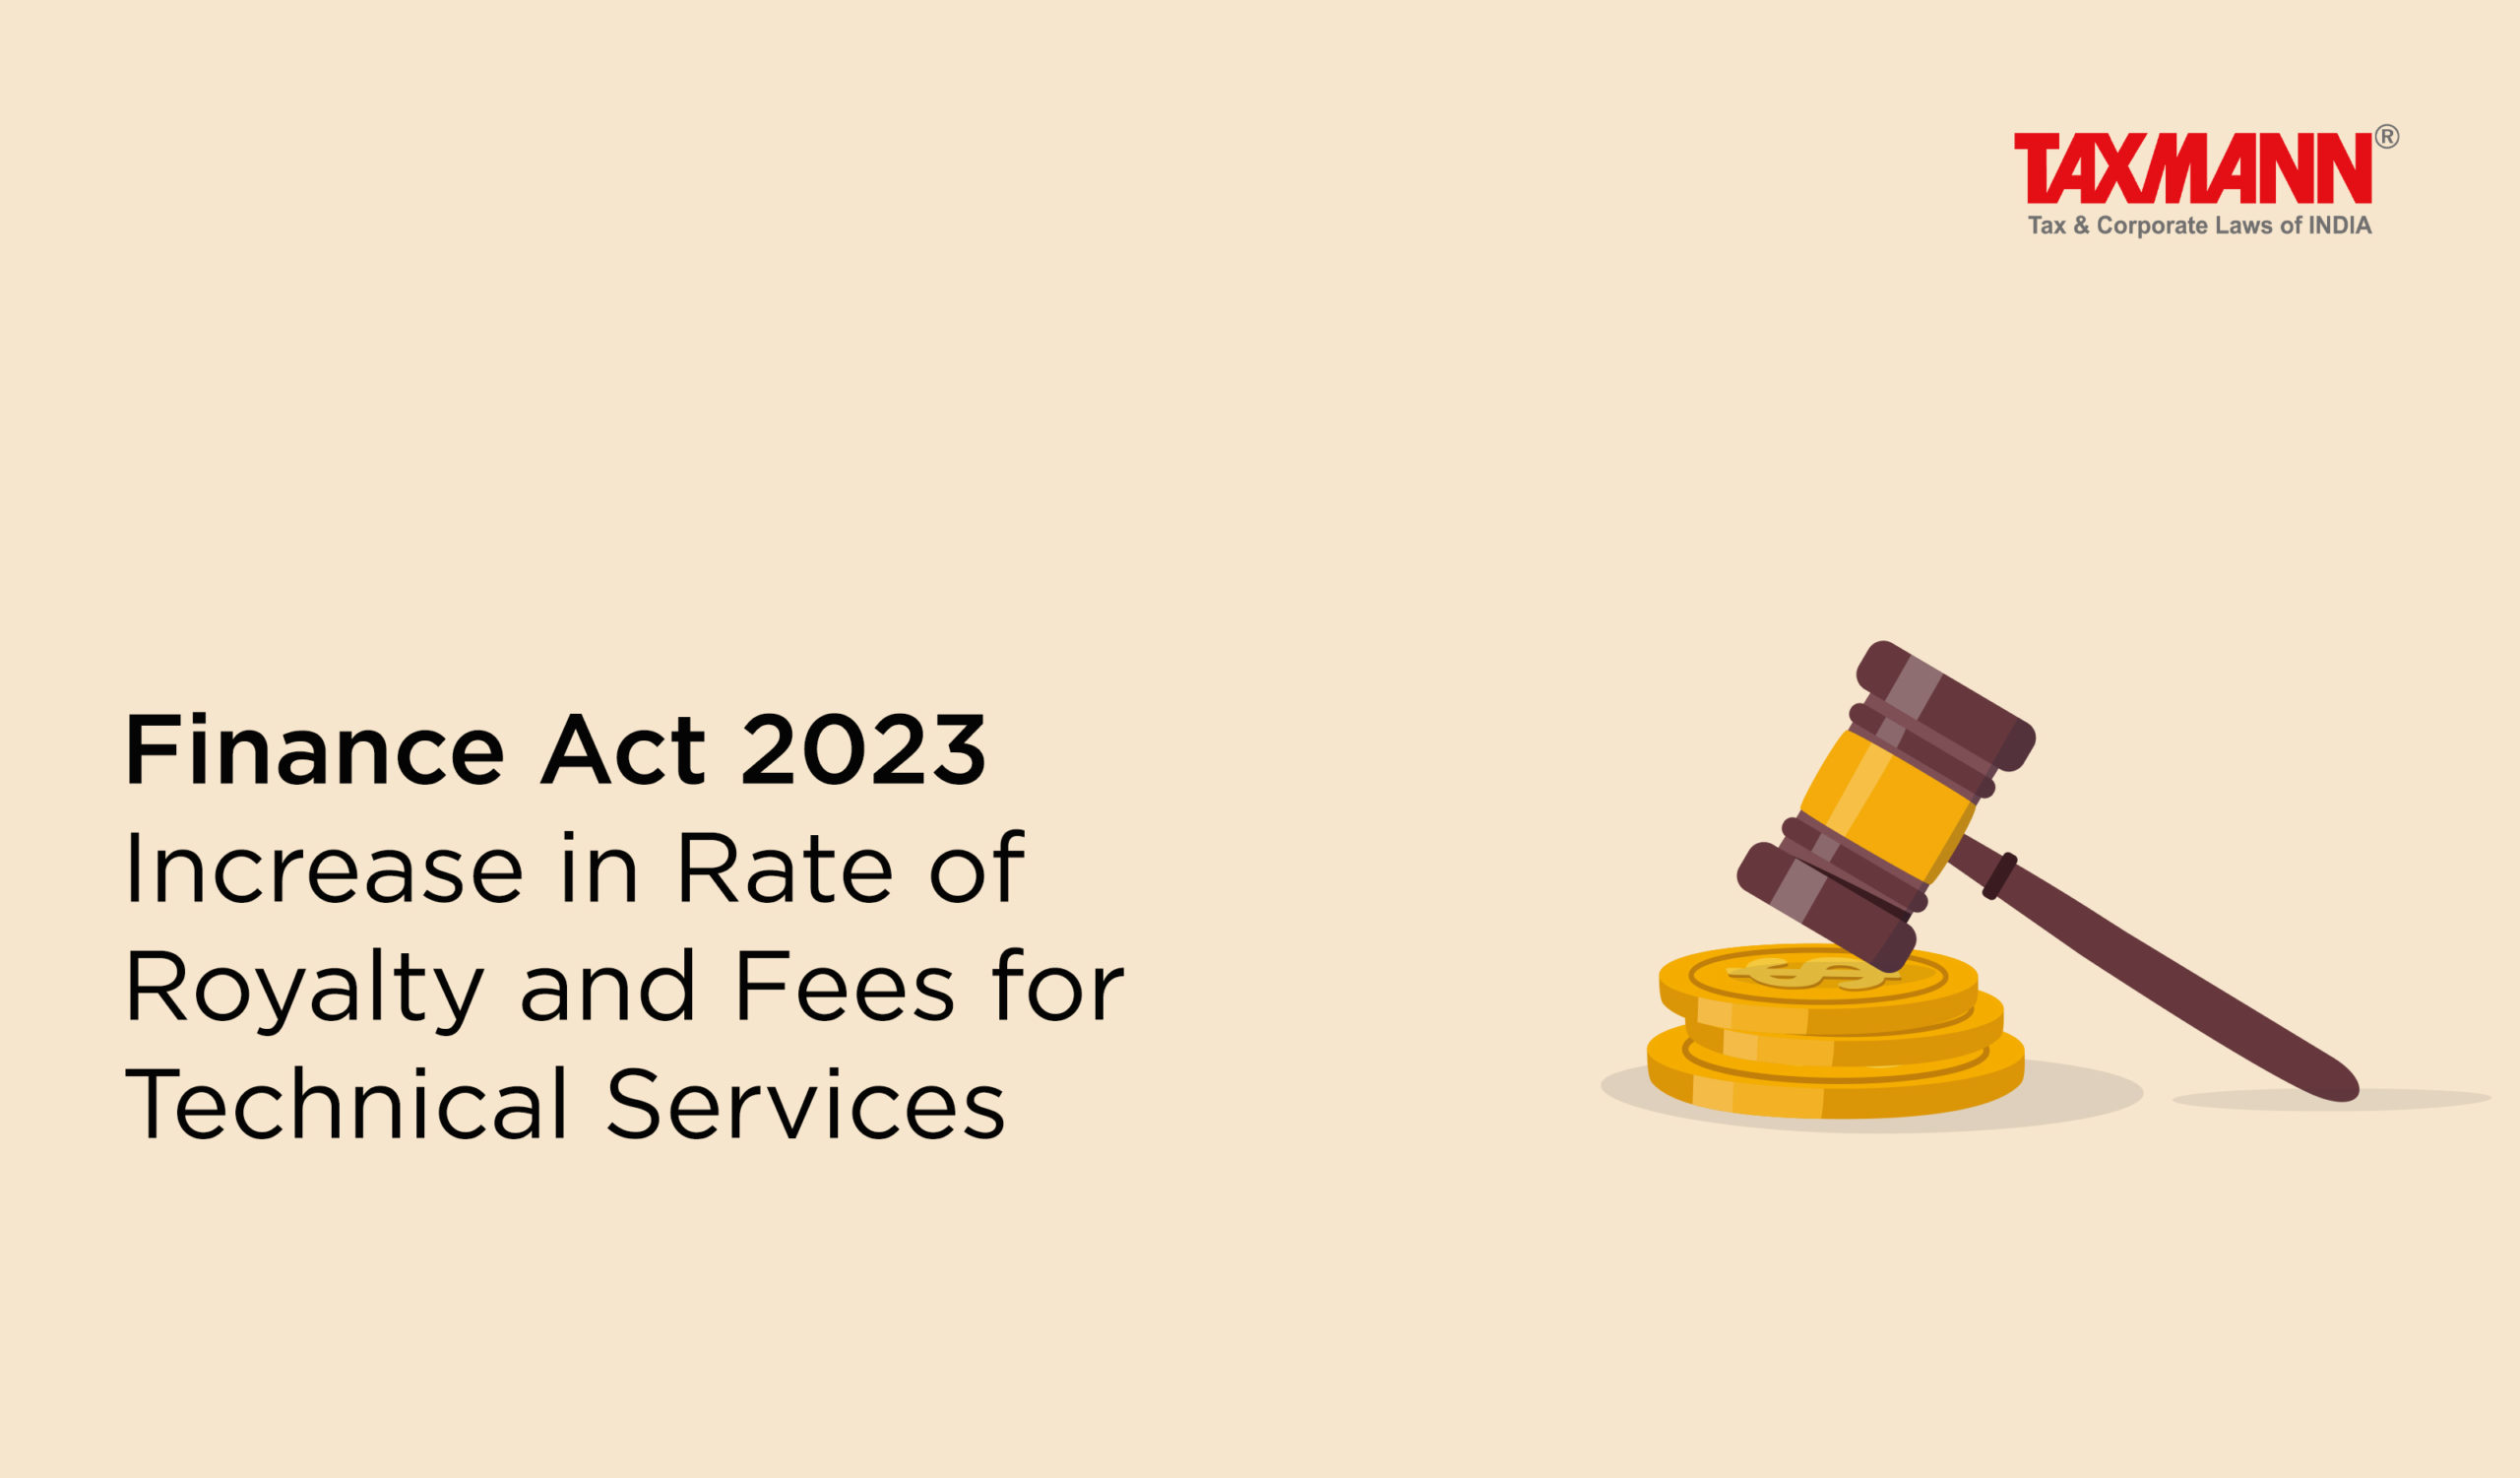 Finance Act 2023 Increase in Rate of Royalty and Fees for Technical